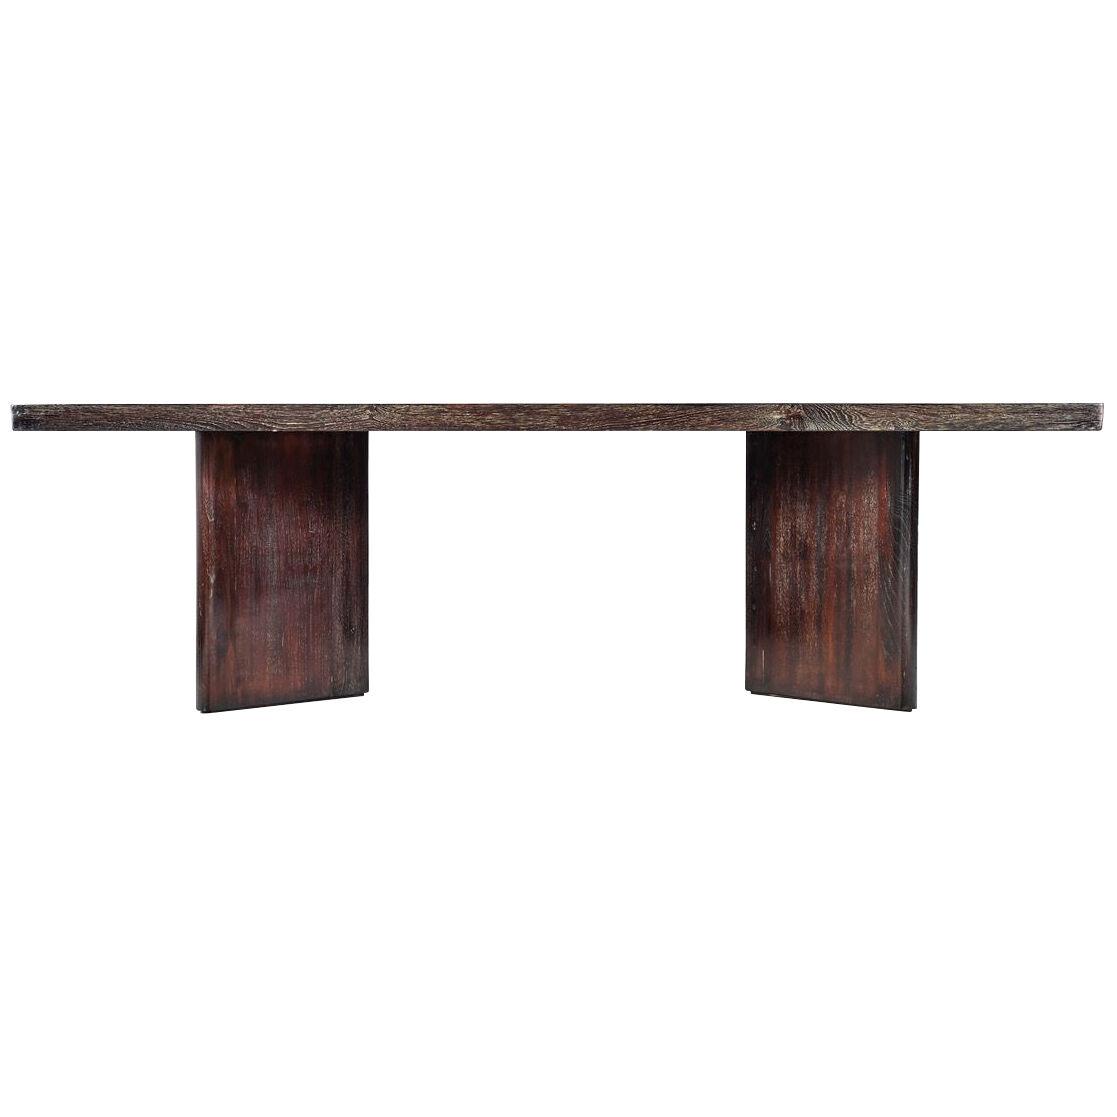 Library Table by Pierre Jeanneret circa 1955-56